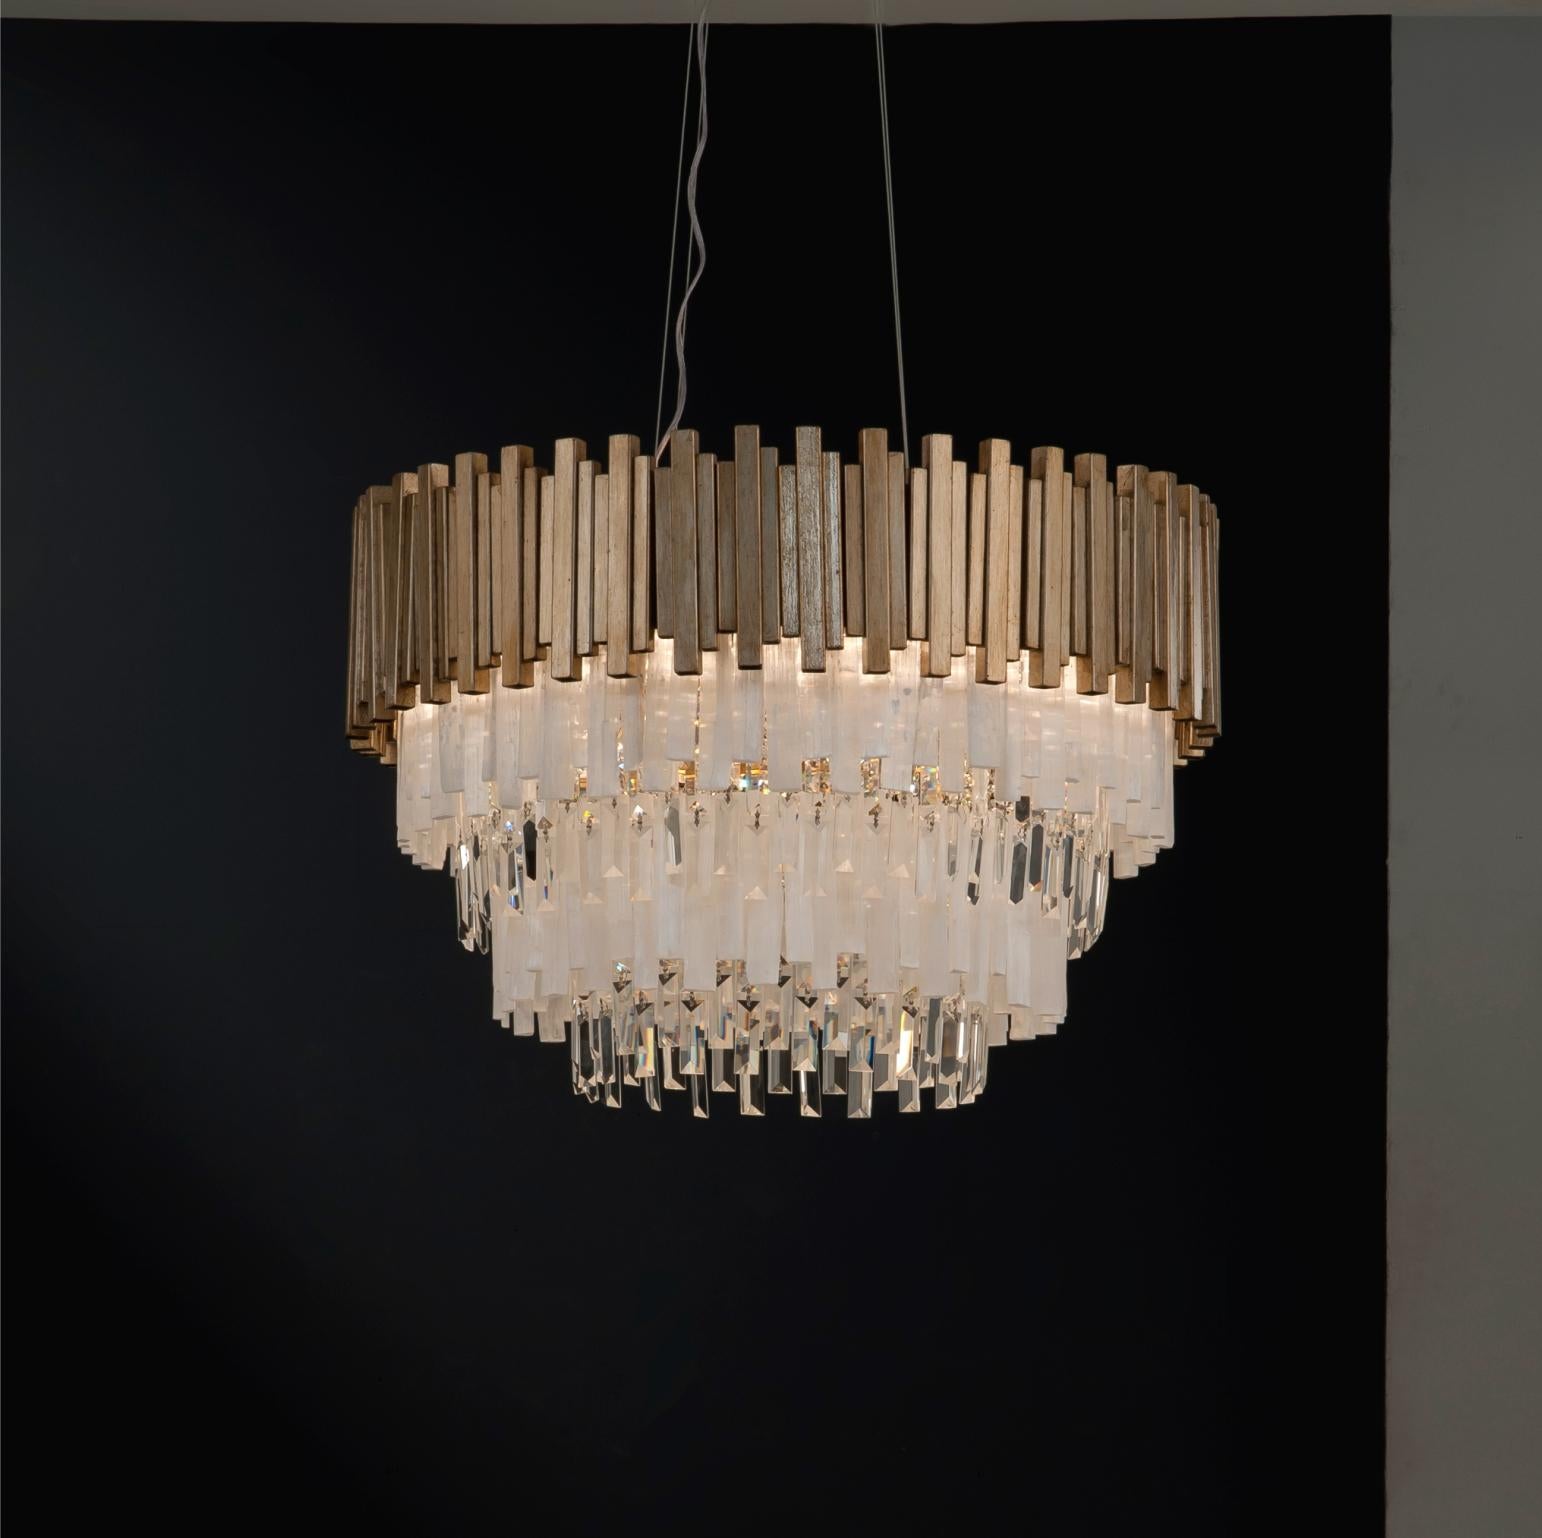 Selenite chandelier lamp by Aver 
Dimensions: diameter 76 x height 48 cm 
Materials: Aluminum, plated. Natural Moroccan/Clear Rock, Moroccan Rock.
Lighting: 12 x E-14 25w.
Finish: silver veneer, aged silver veneer, gold veneer, aged gold veneer,